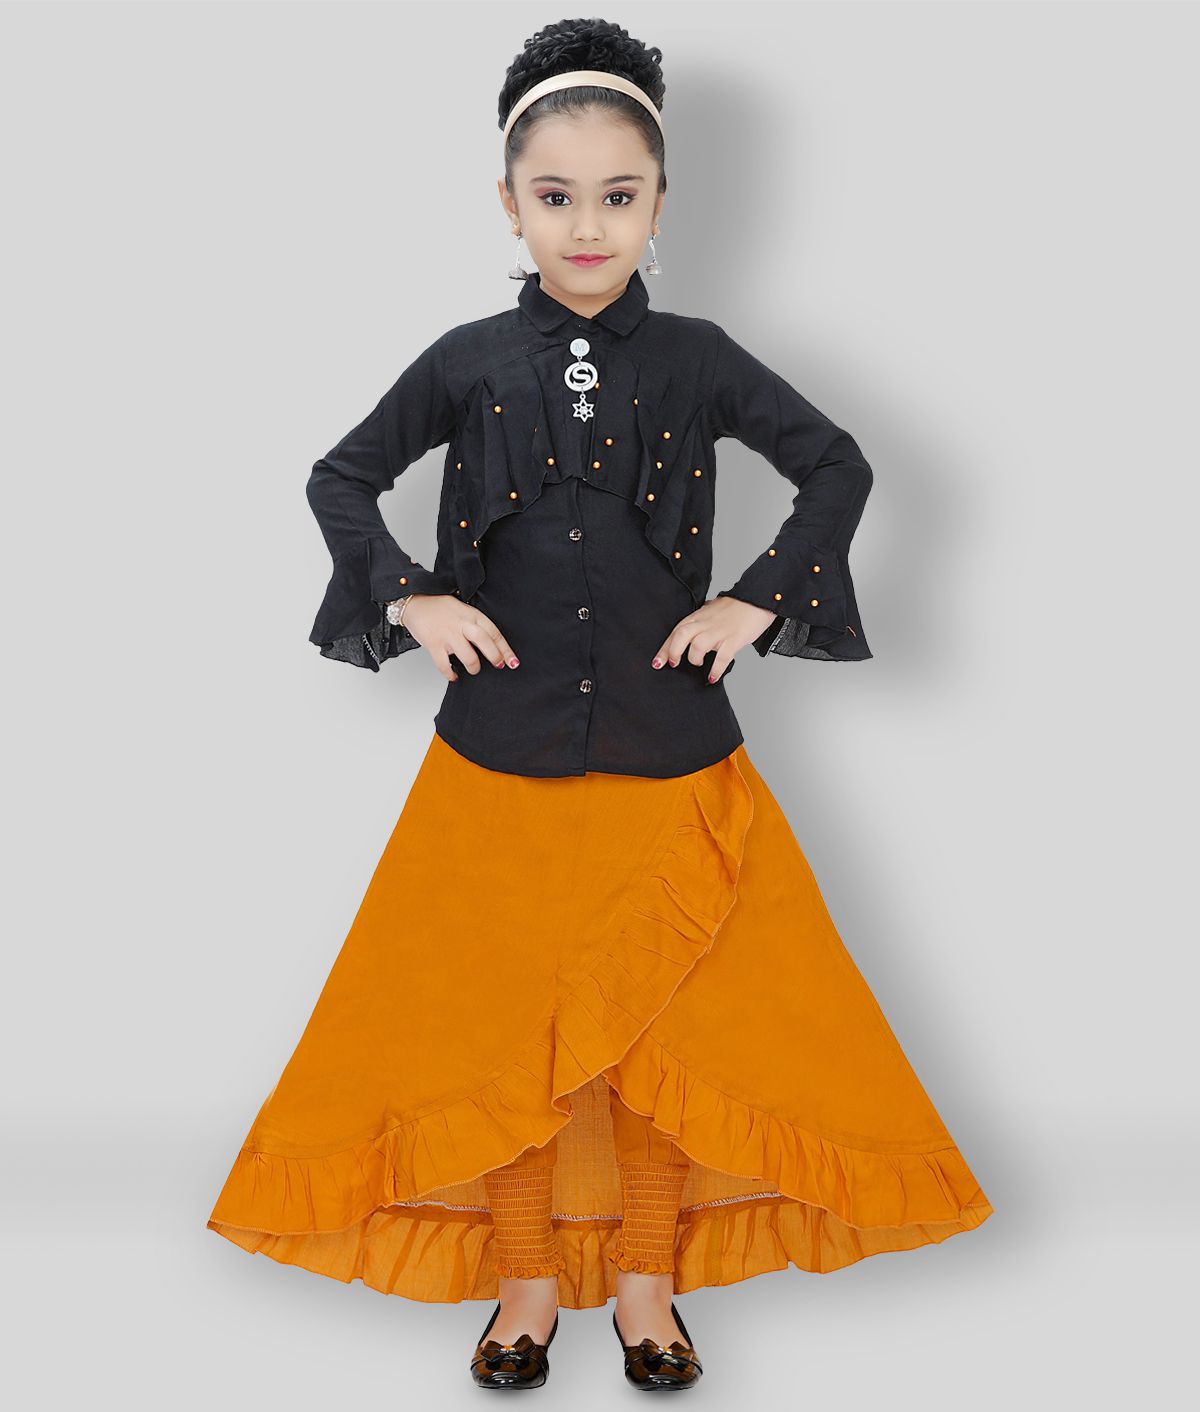     			Arshia Fashions - Yellow Cotton Blend Girl's Top With Skirt ( Pack of 1 )